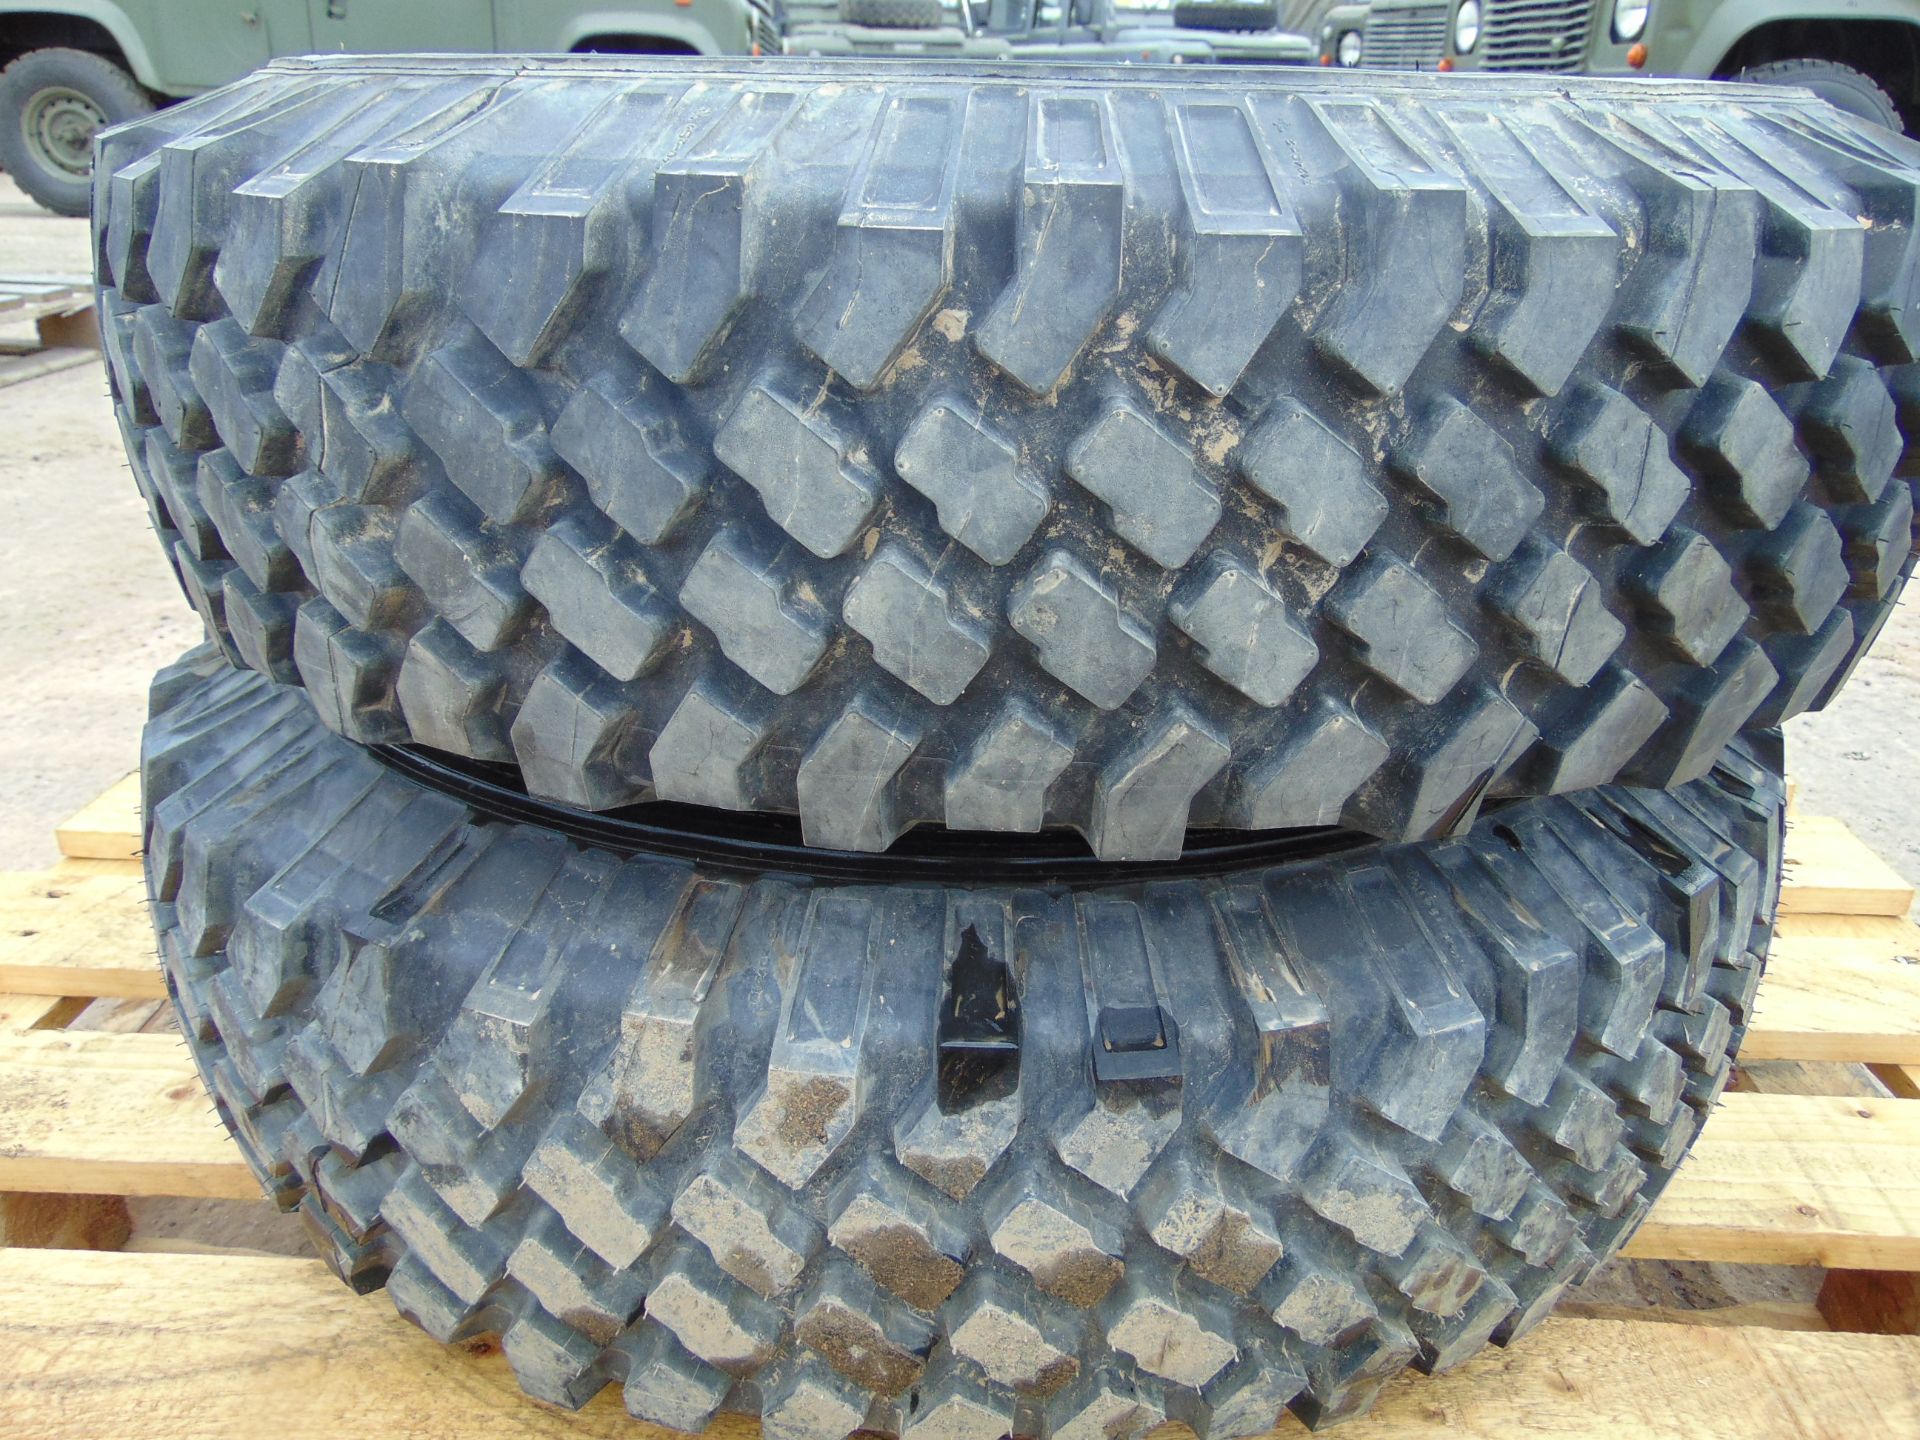 2 x Michelin 4x4 O/R LT235/85R16 Tyres with Wolf Rims - Image 6 of 6